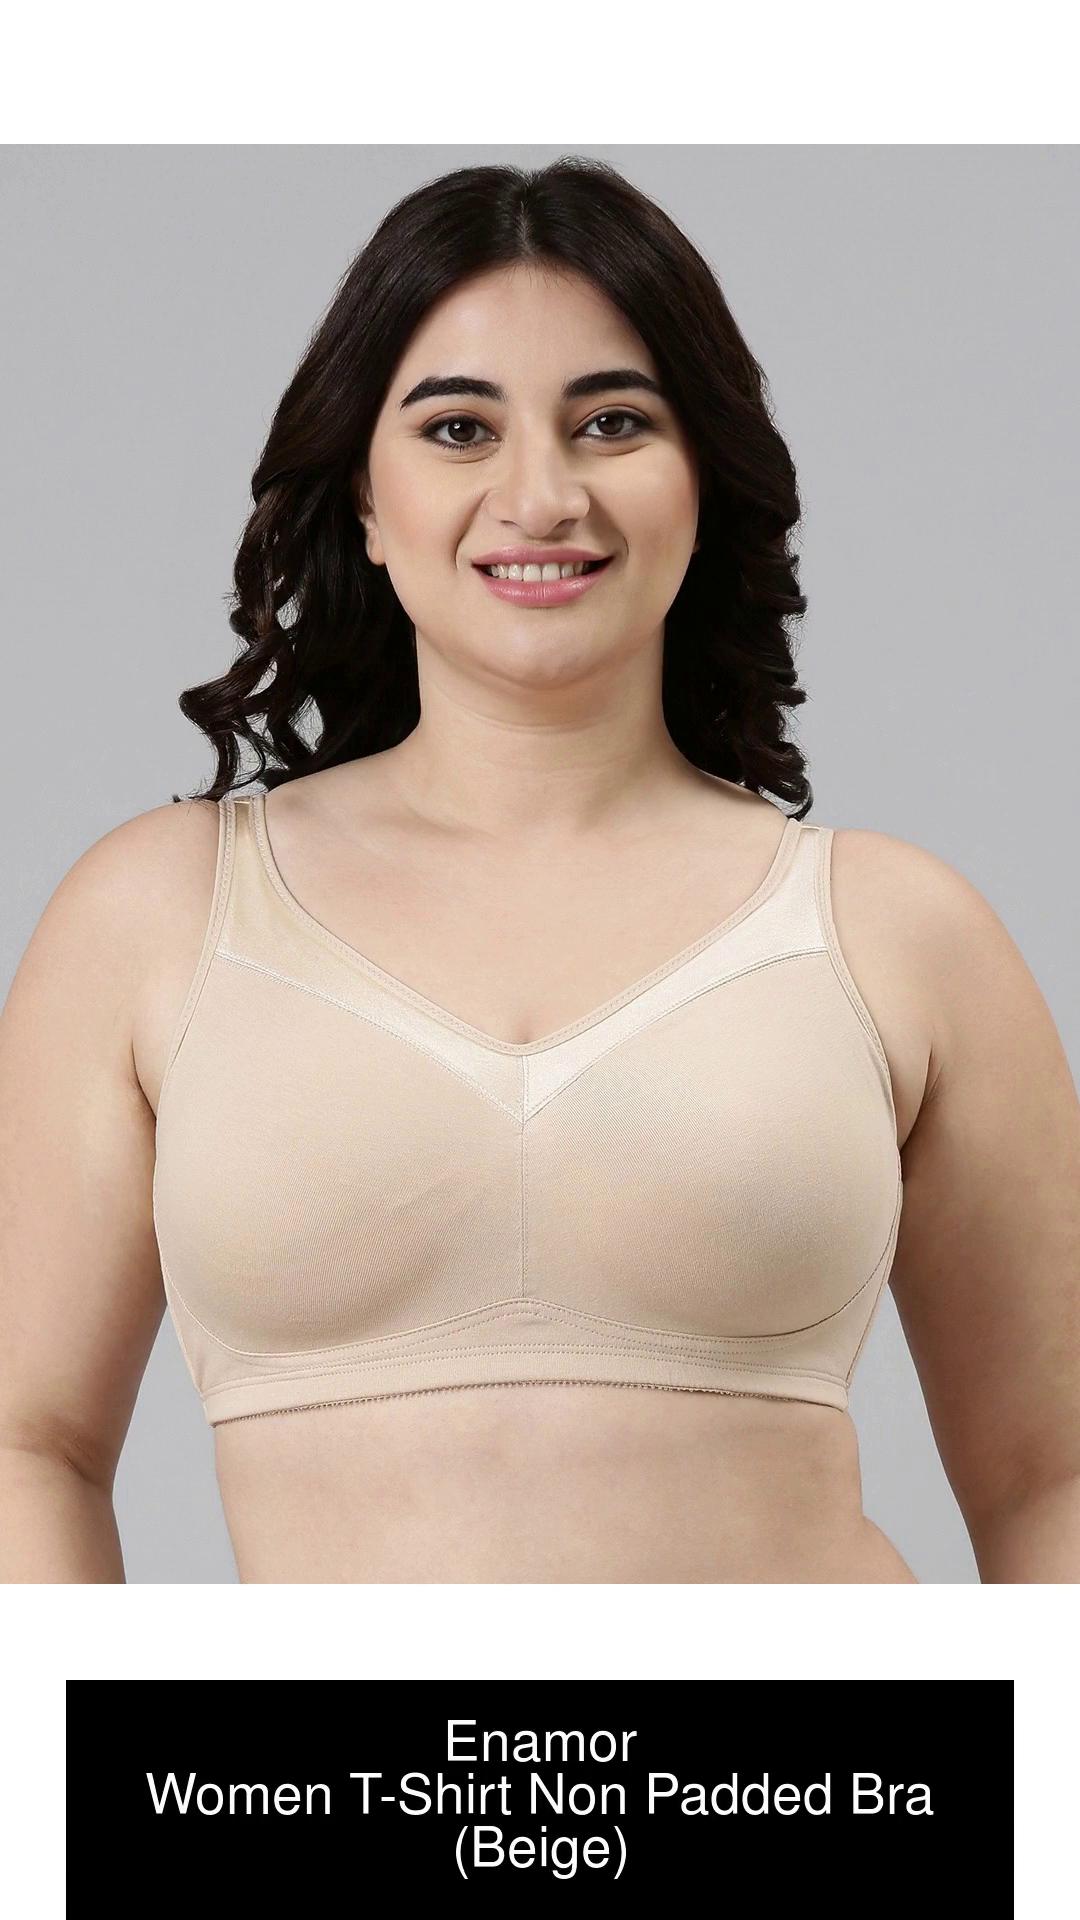 Enamor A053 Side Shaper Balconette Bra Stretch Cotton Non-Padded Wirefree  High Coverage in Durg at best price by Simmo Matching - Justdial